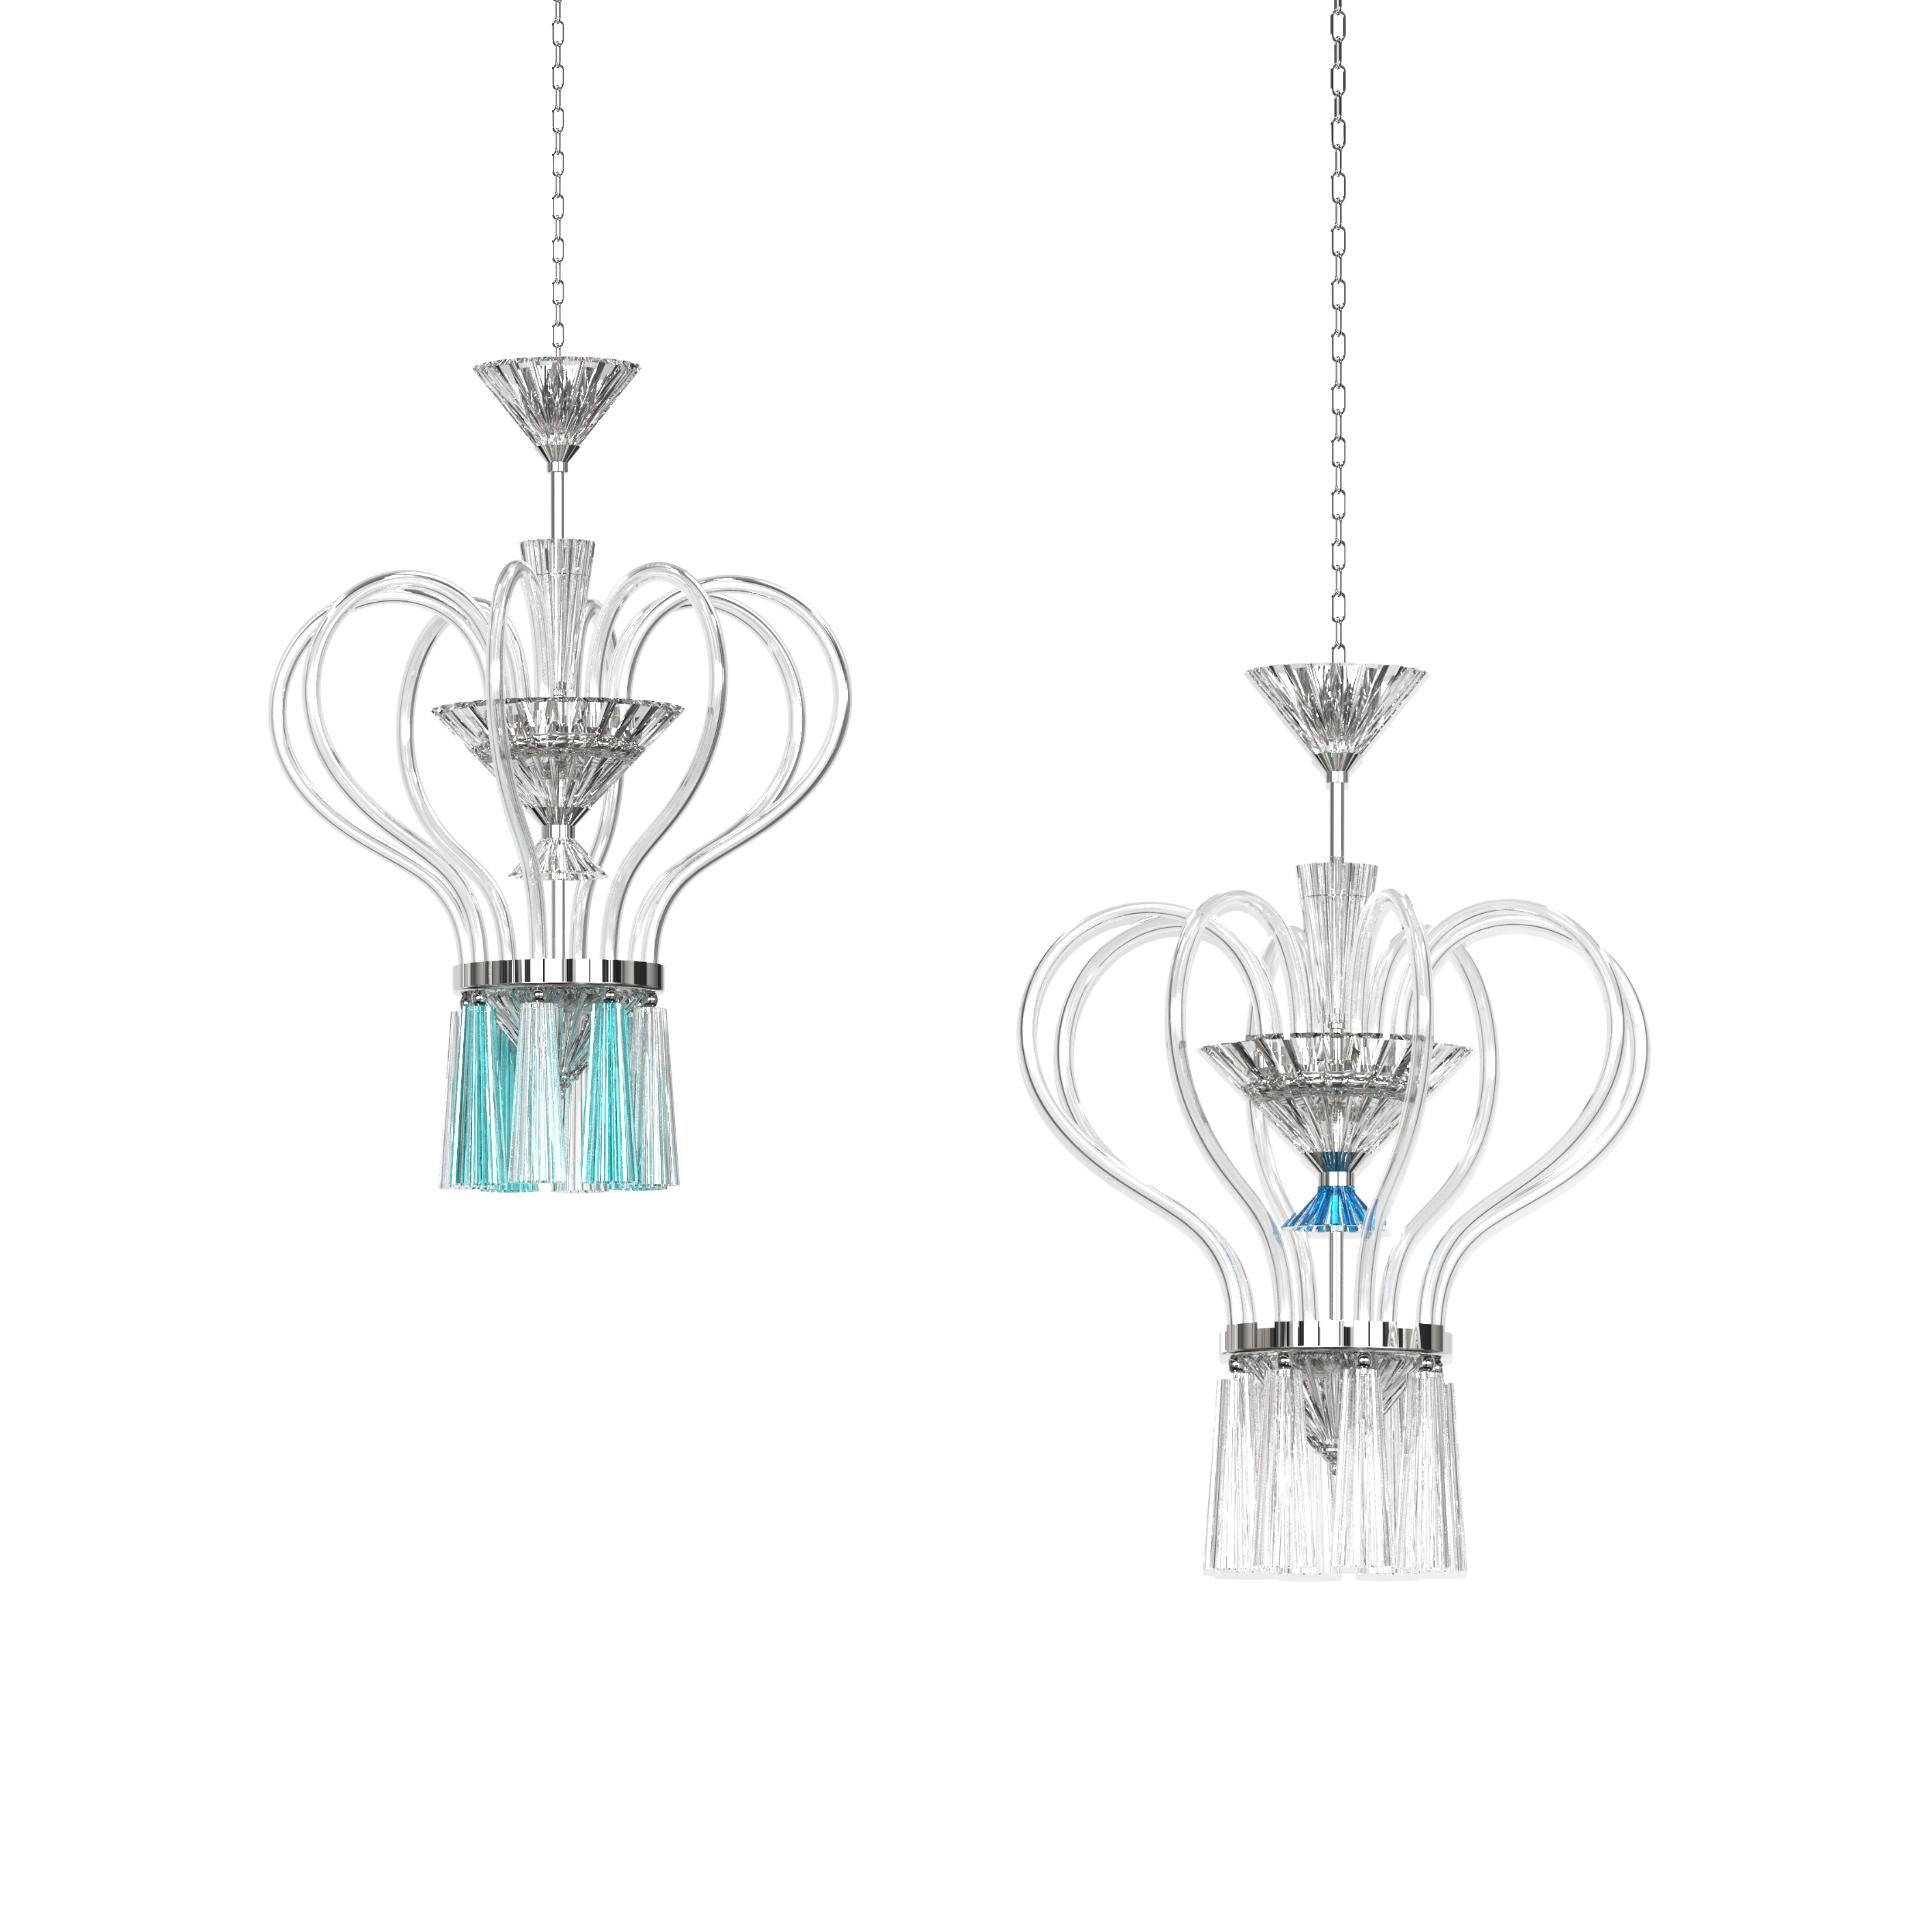 Polished Cuore New-Classical Handmade Crystal Chandelier I For Sale